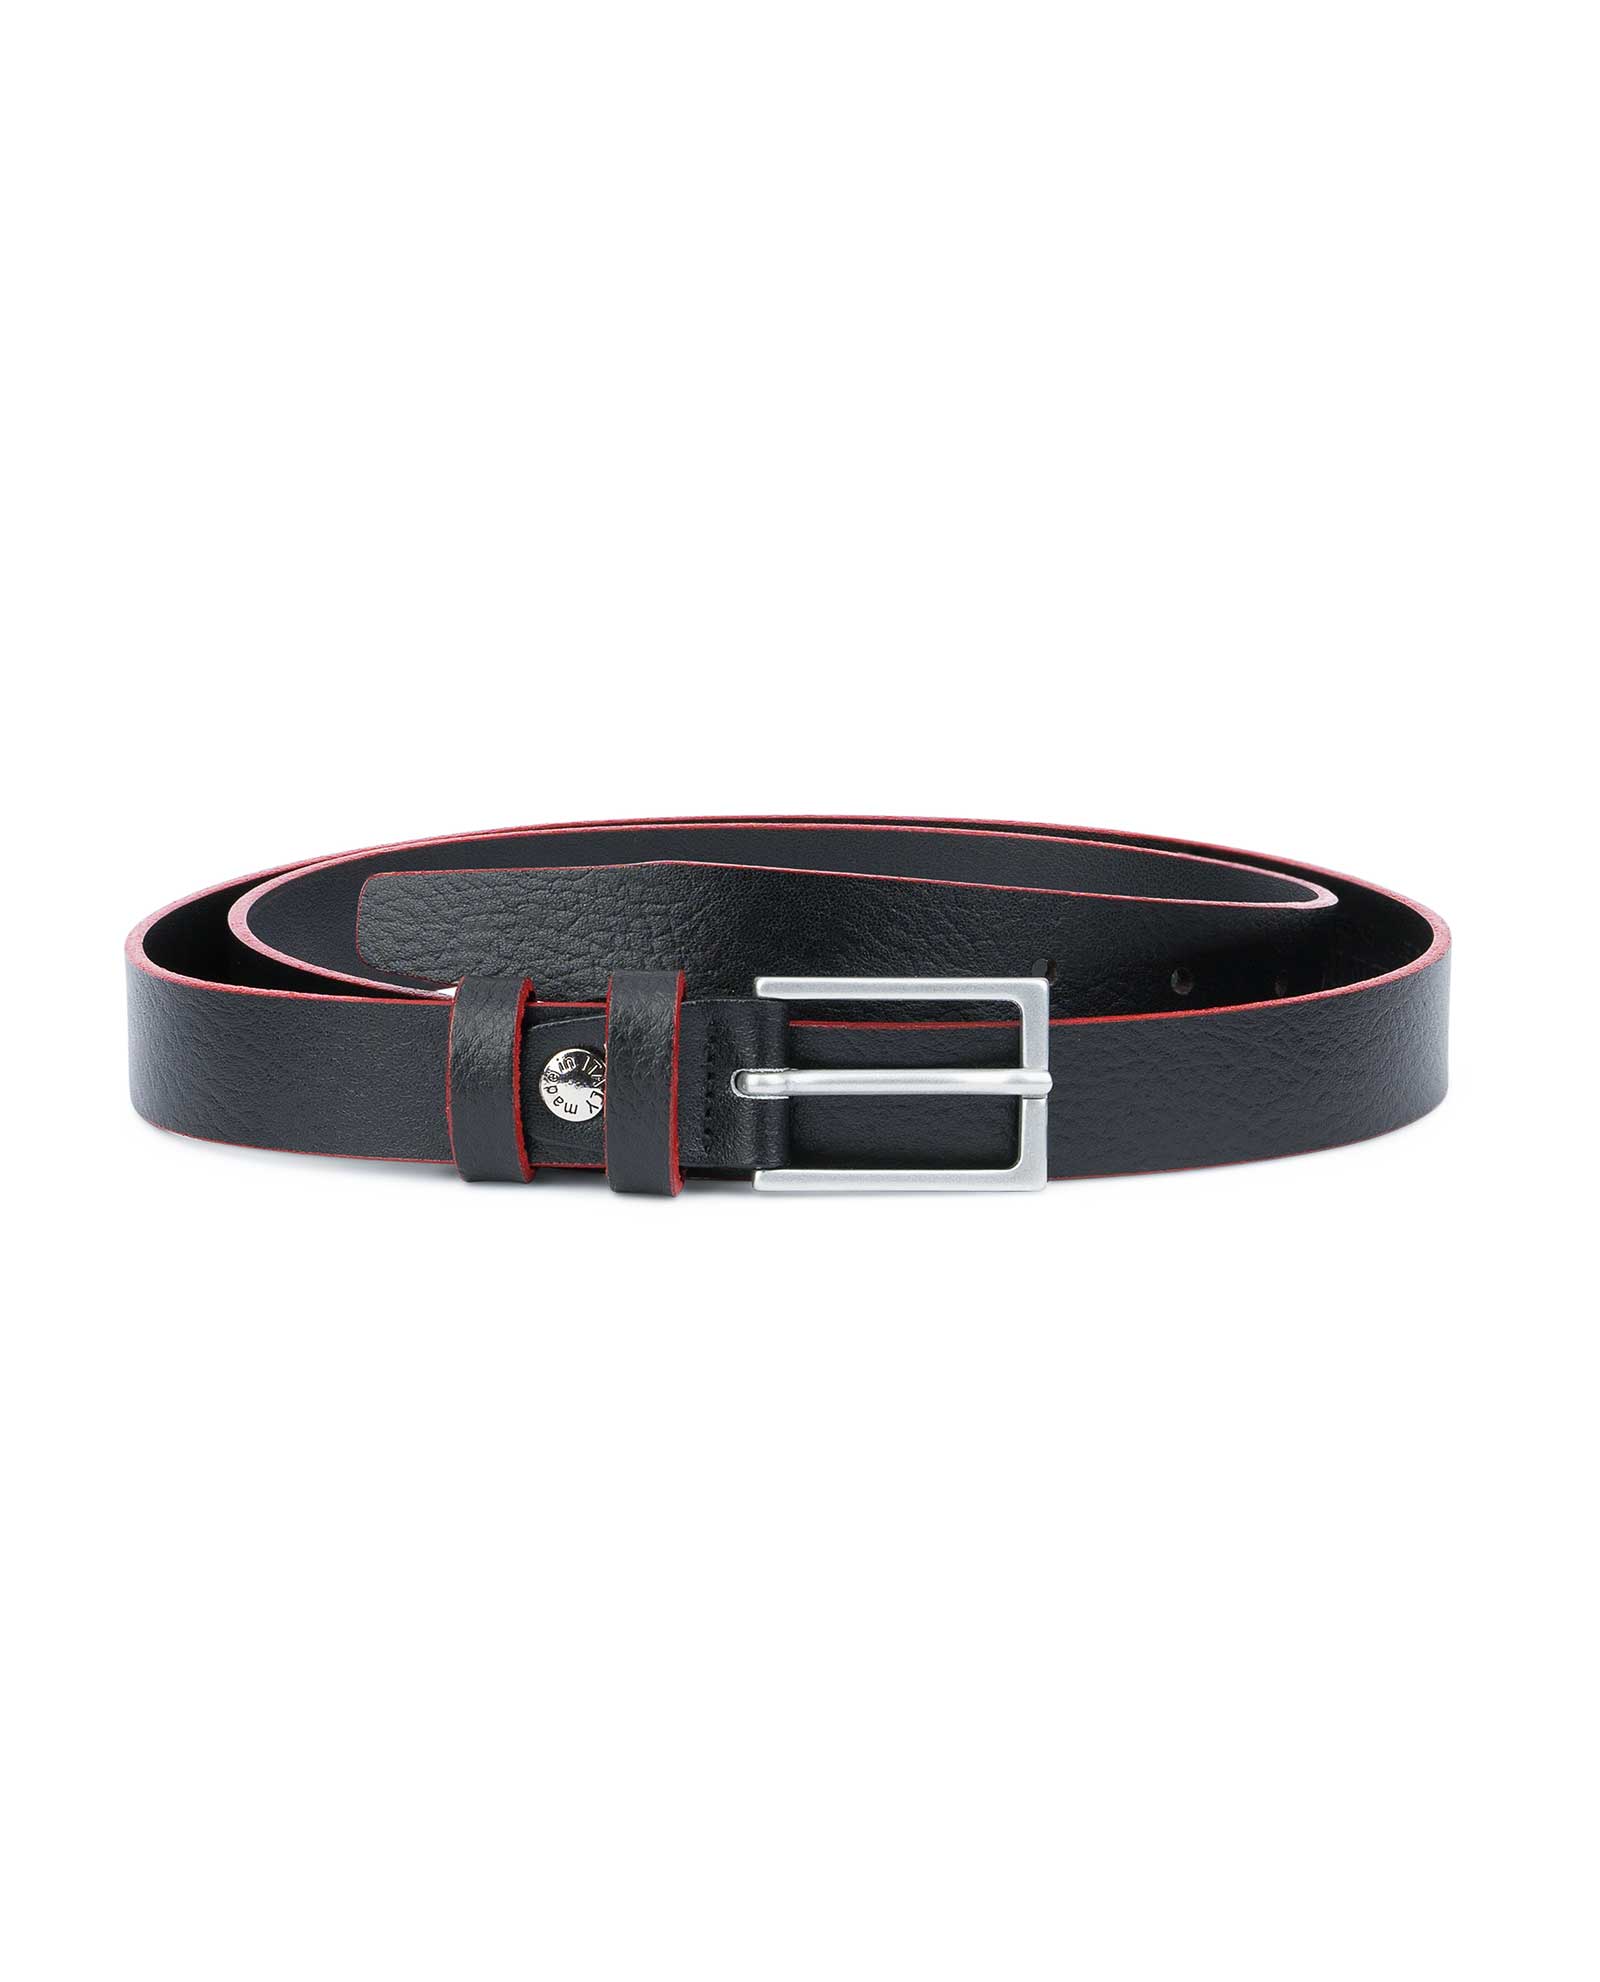 Lowlife SWYD Perf Leather Belt in Black Red 